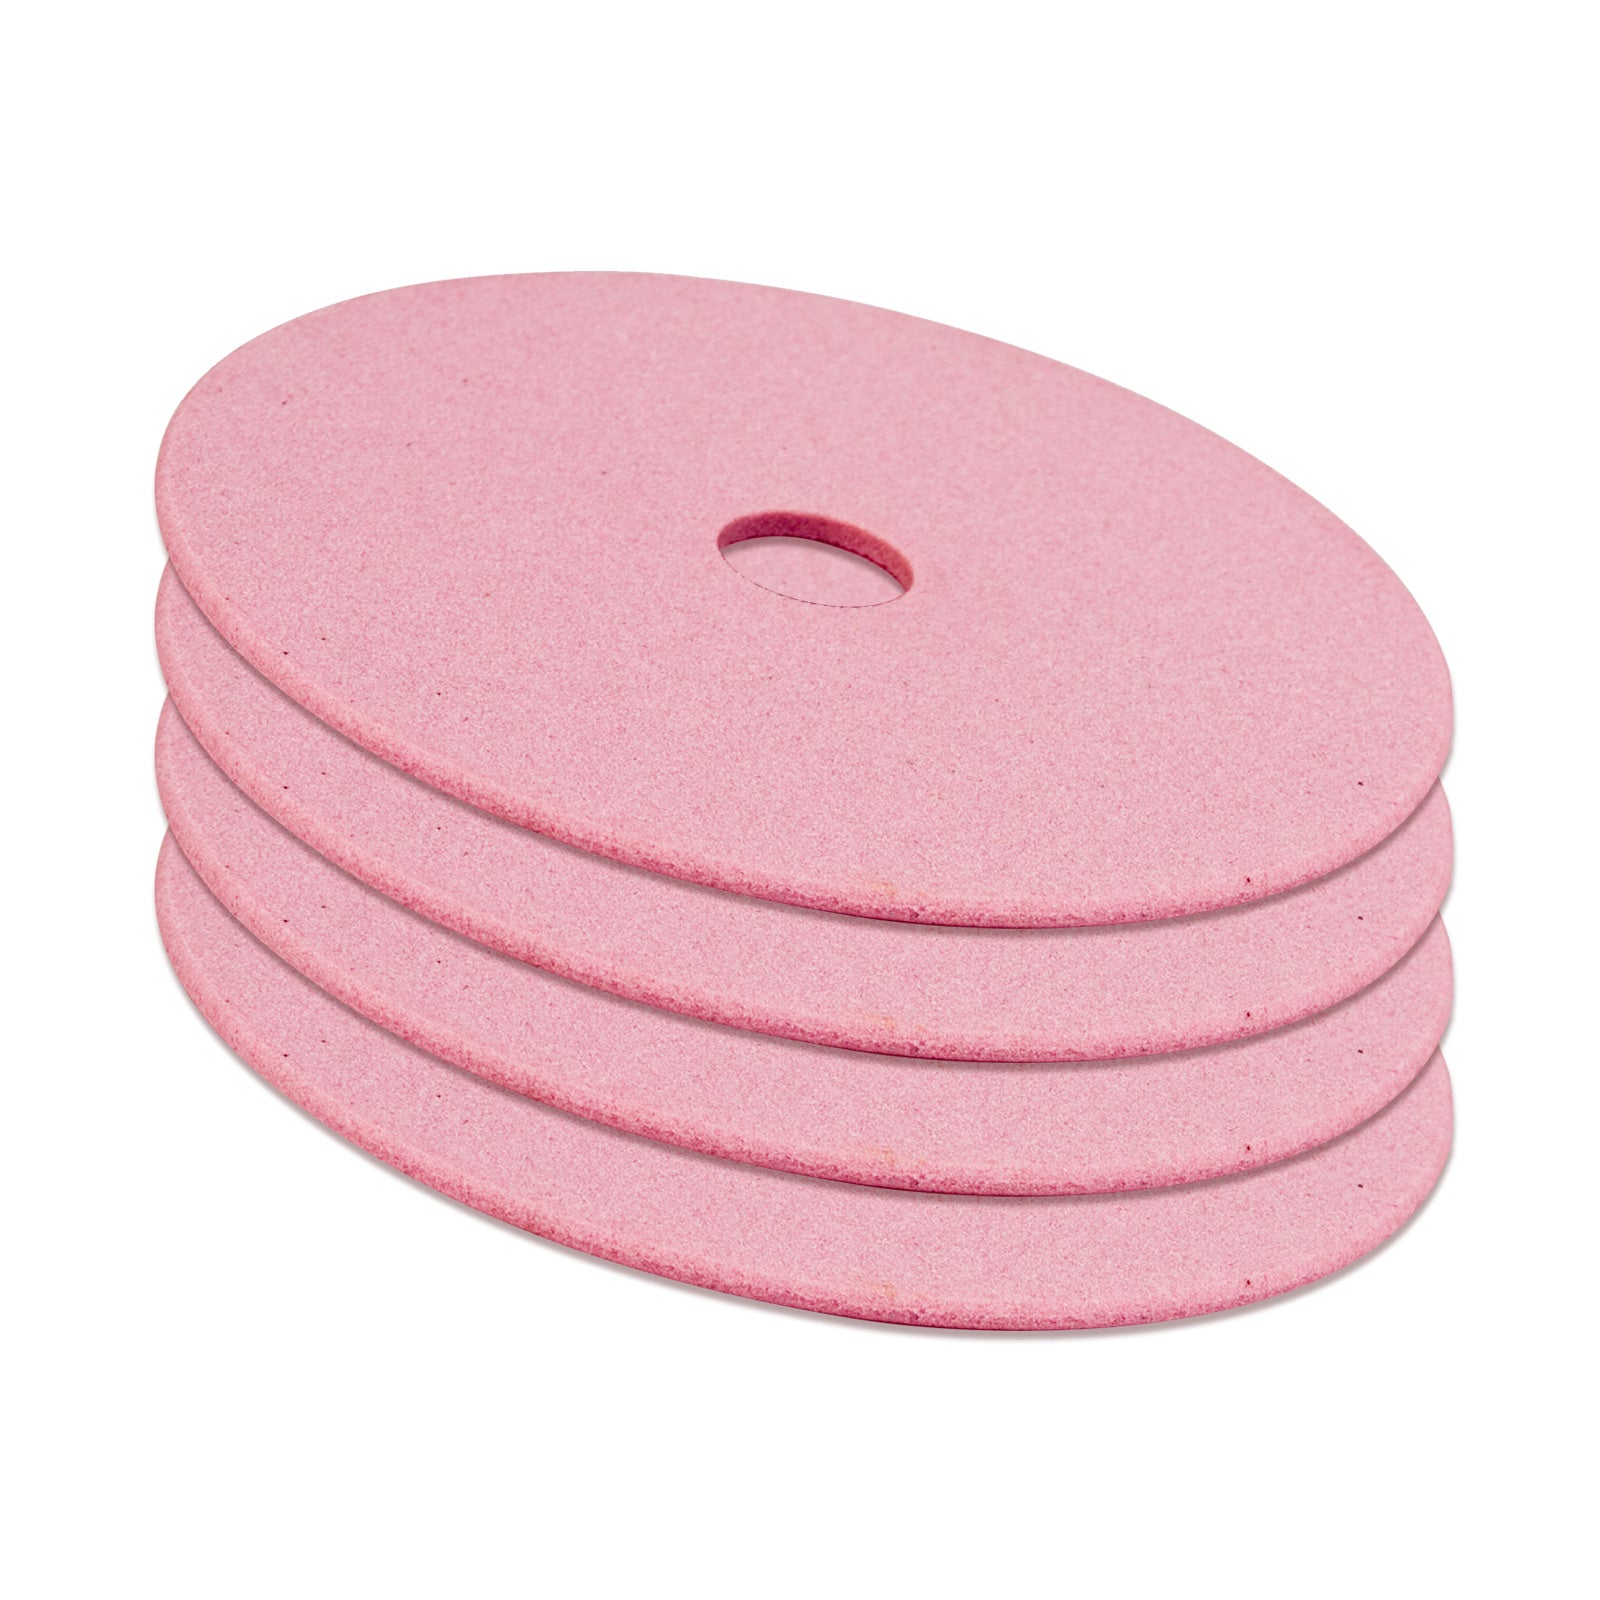 4X Grinding Disc for 320W Chainsaw Sharpener .325 100mm Thin - SILBERSHELL